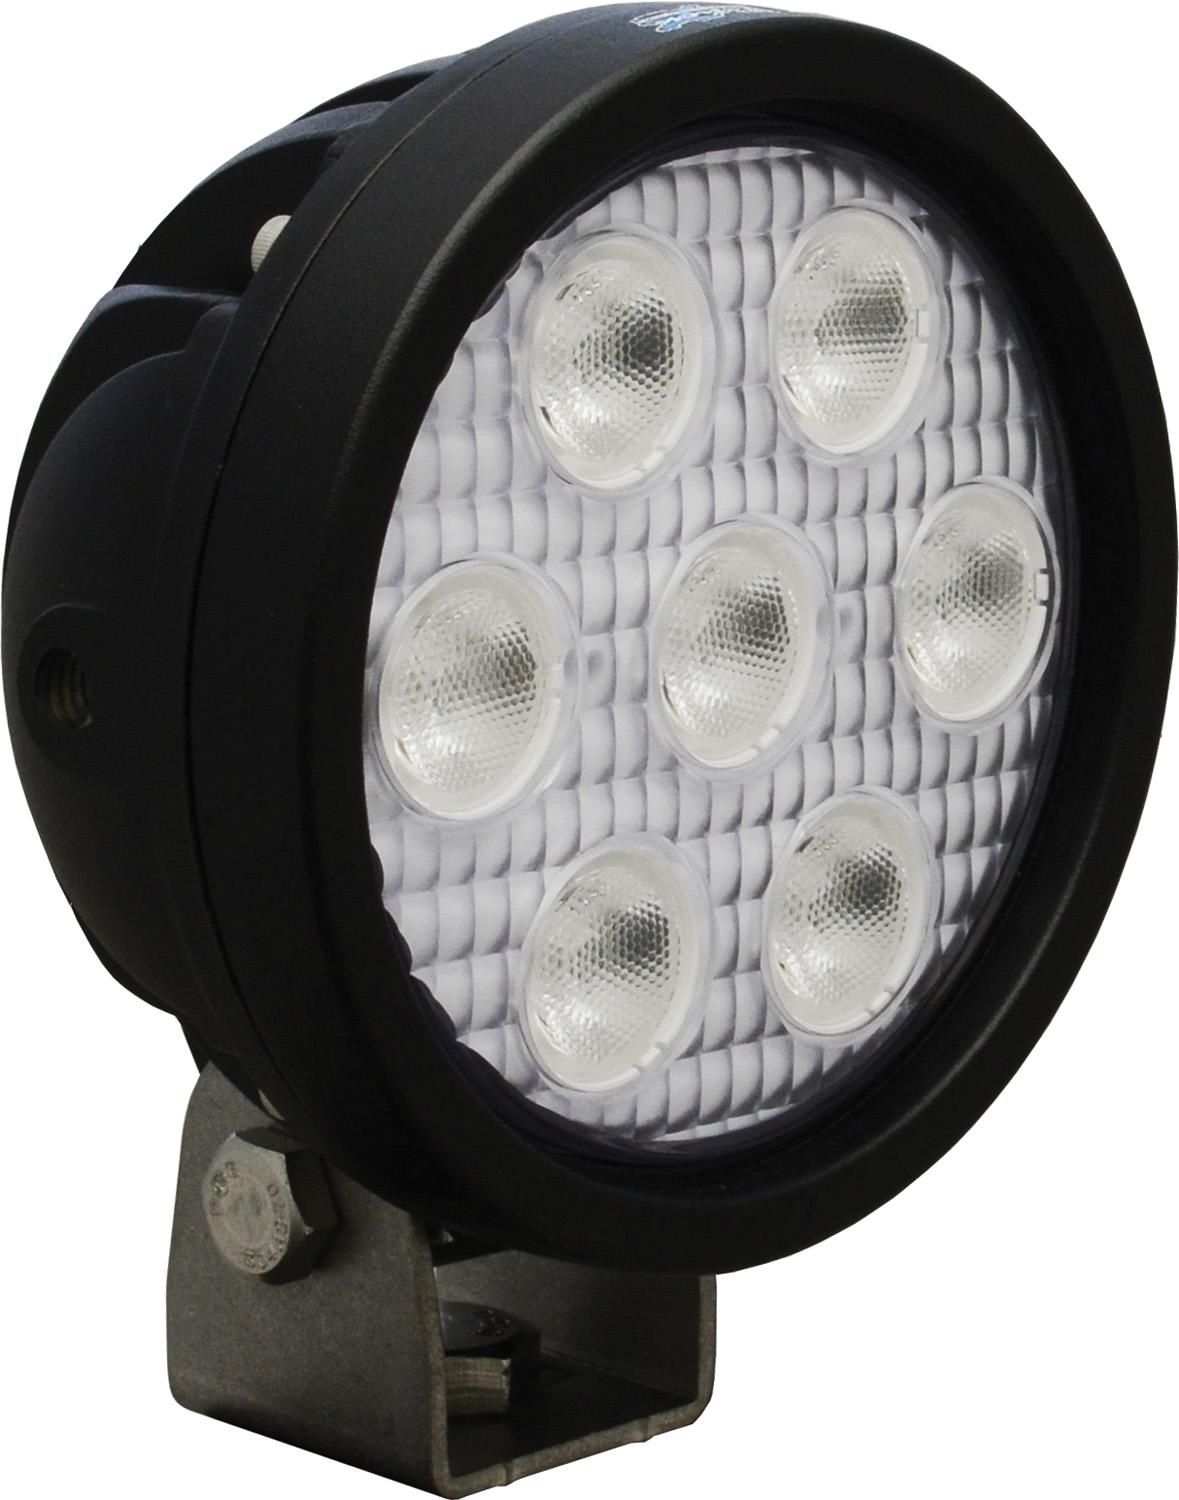 4" ROUND UTILITY MARKET BLACK 7 3W AMBER LED'S 40ç WIDE - Click Image to Close